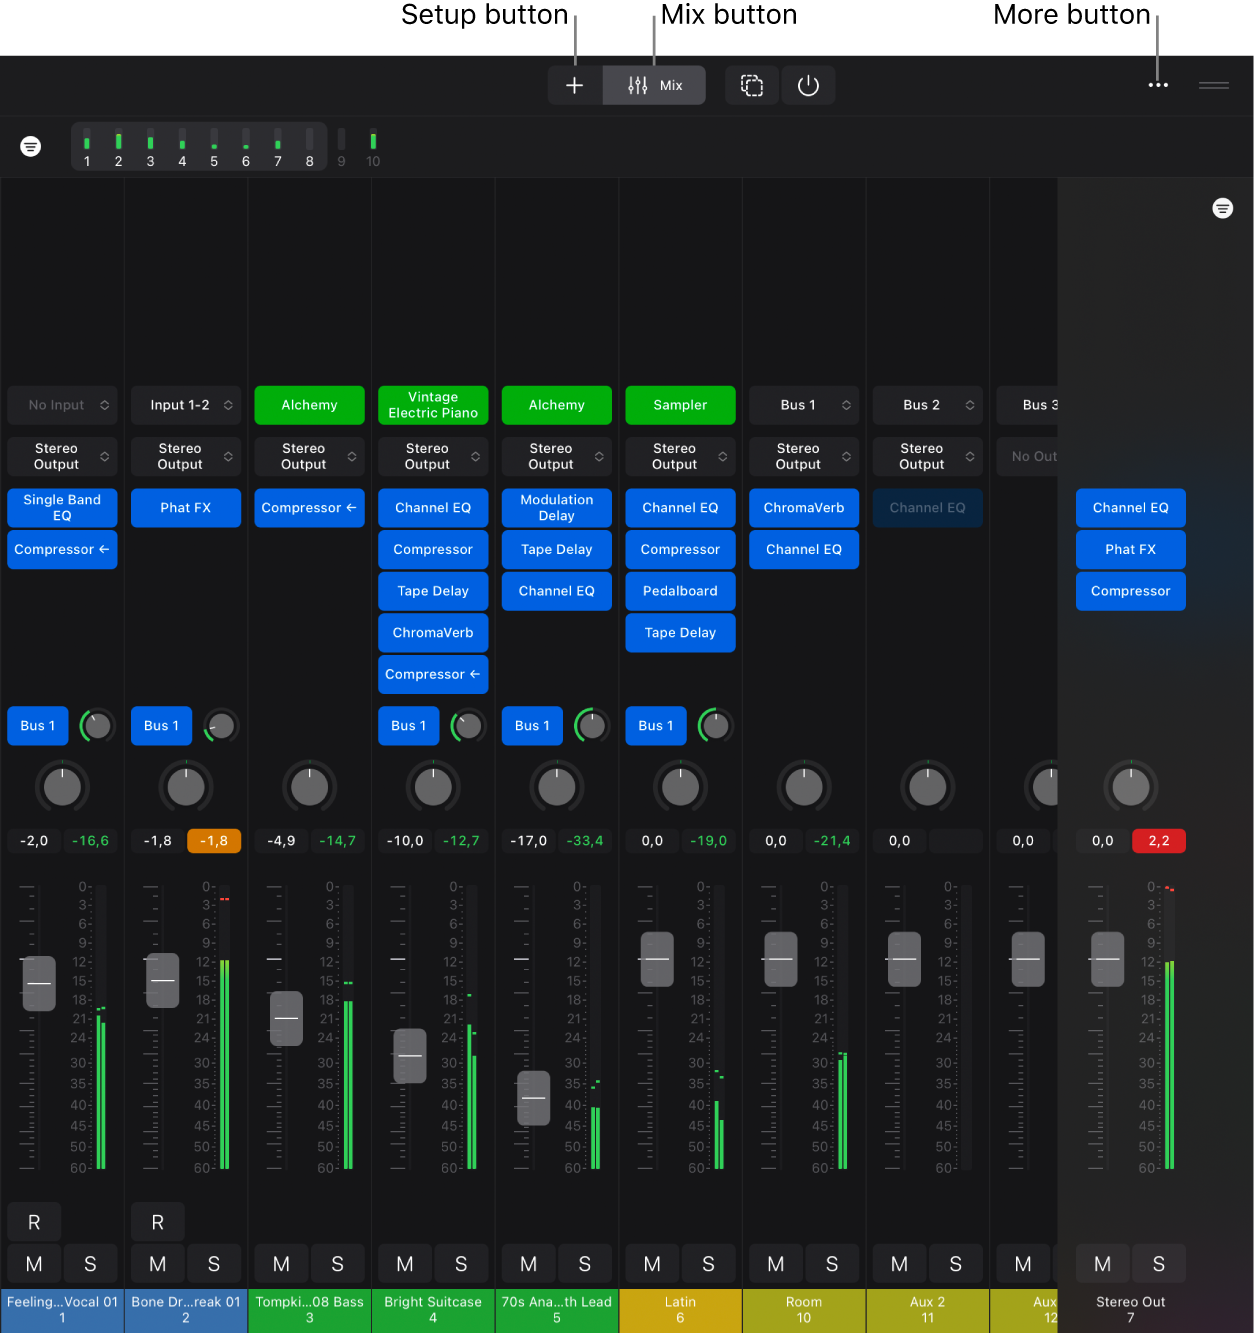 Figure. Mixer showing plug-in slots, channel strip controls, callouts for Setup and Mix buttons.